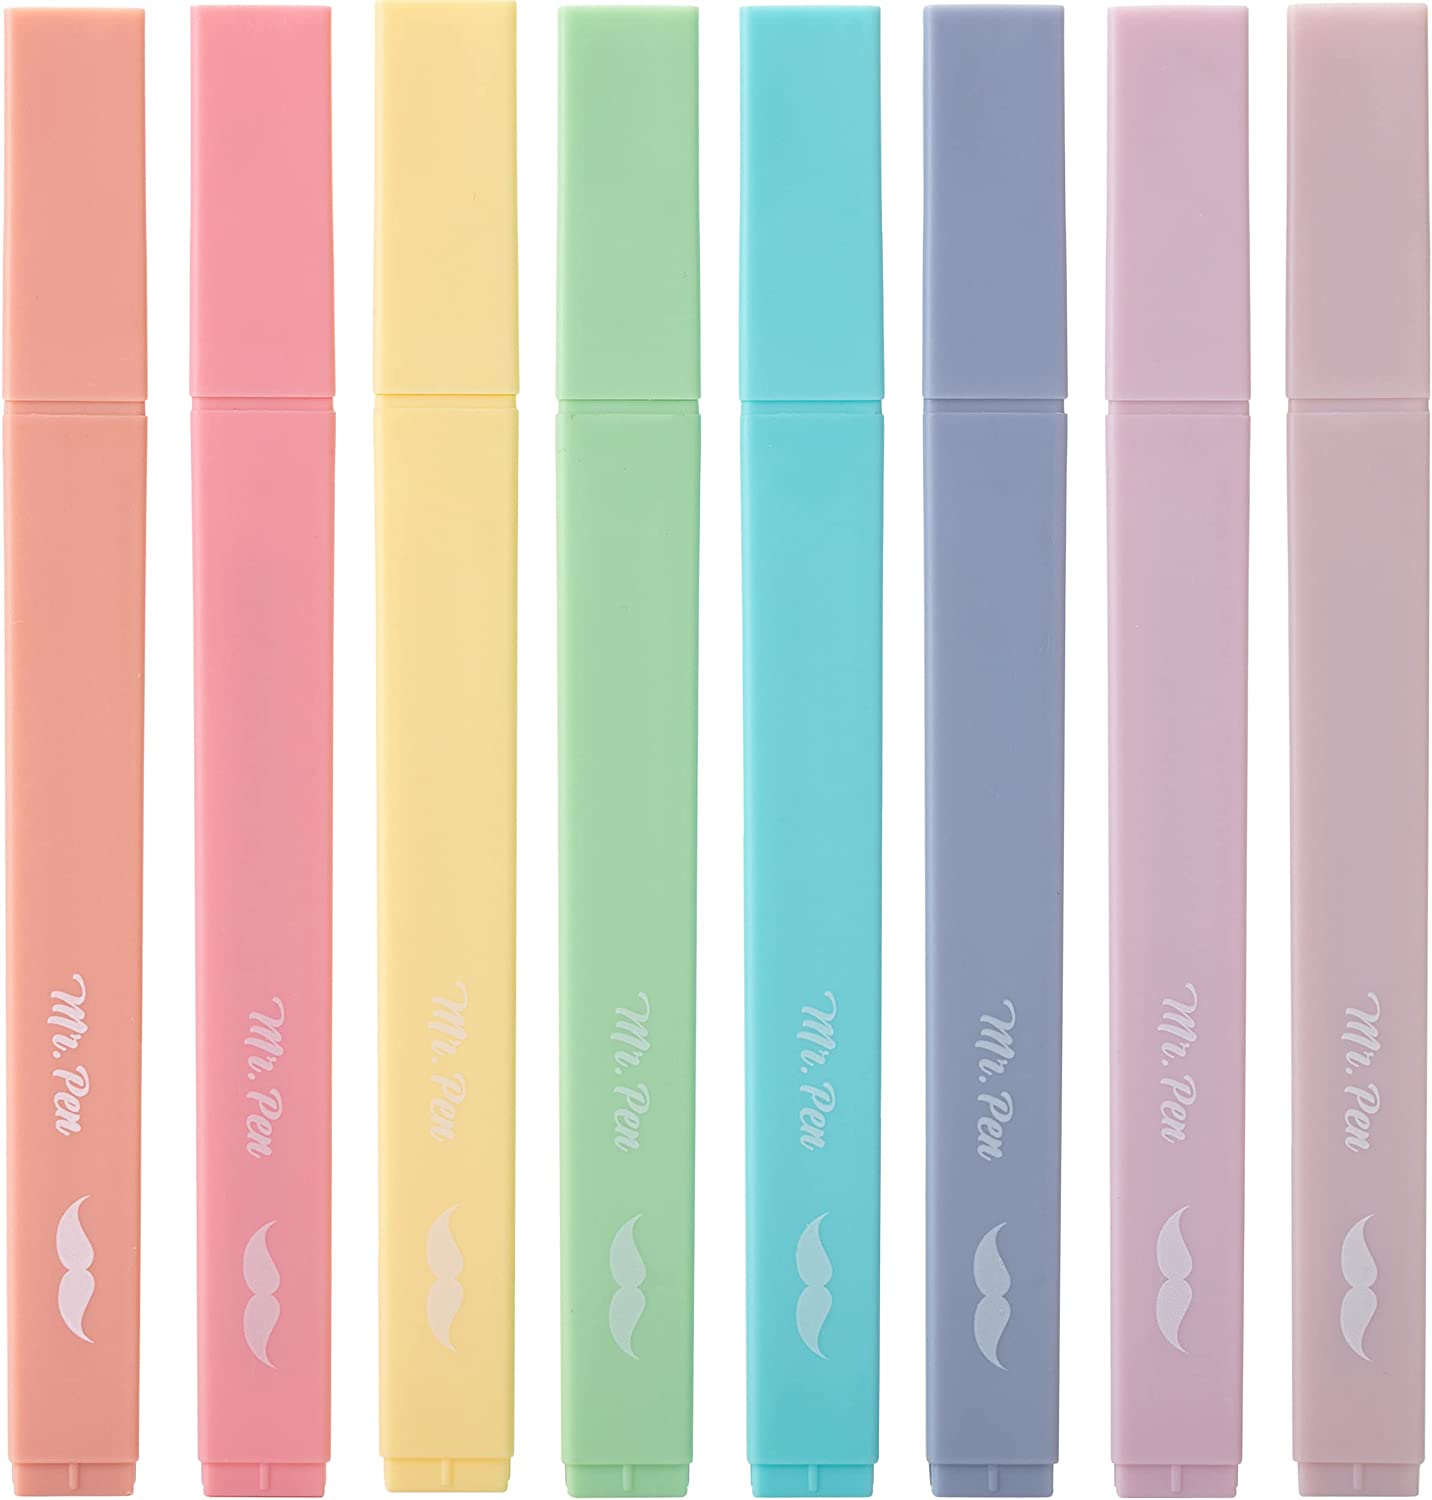 Mr. Pen- Aesthetic Highlighters, 8 pcs, Chisel Tip, Candy Colors